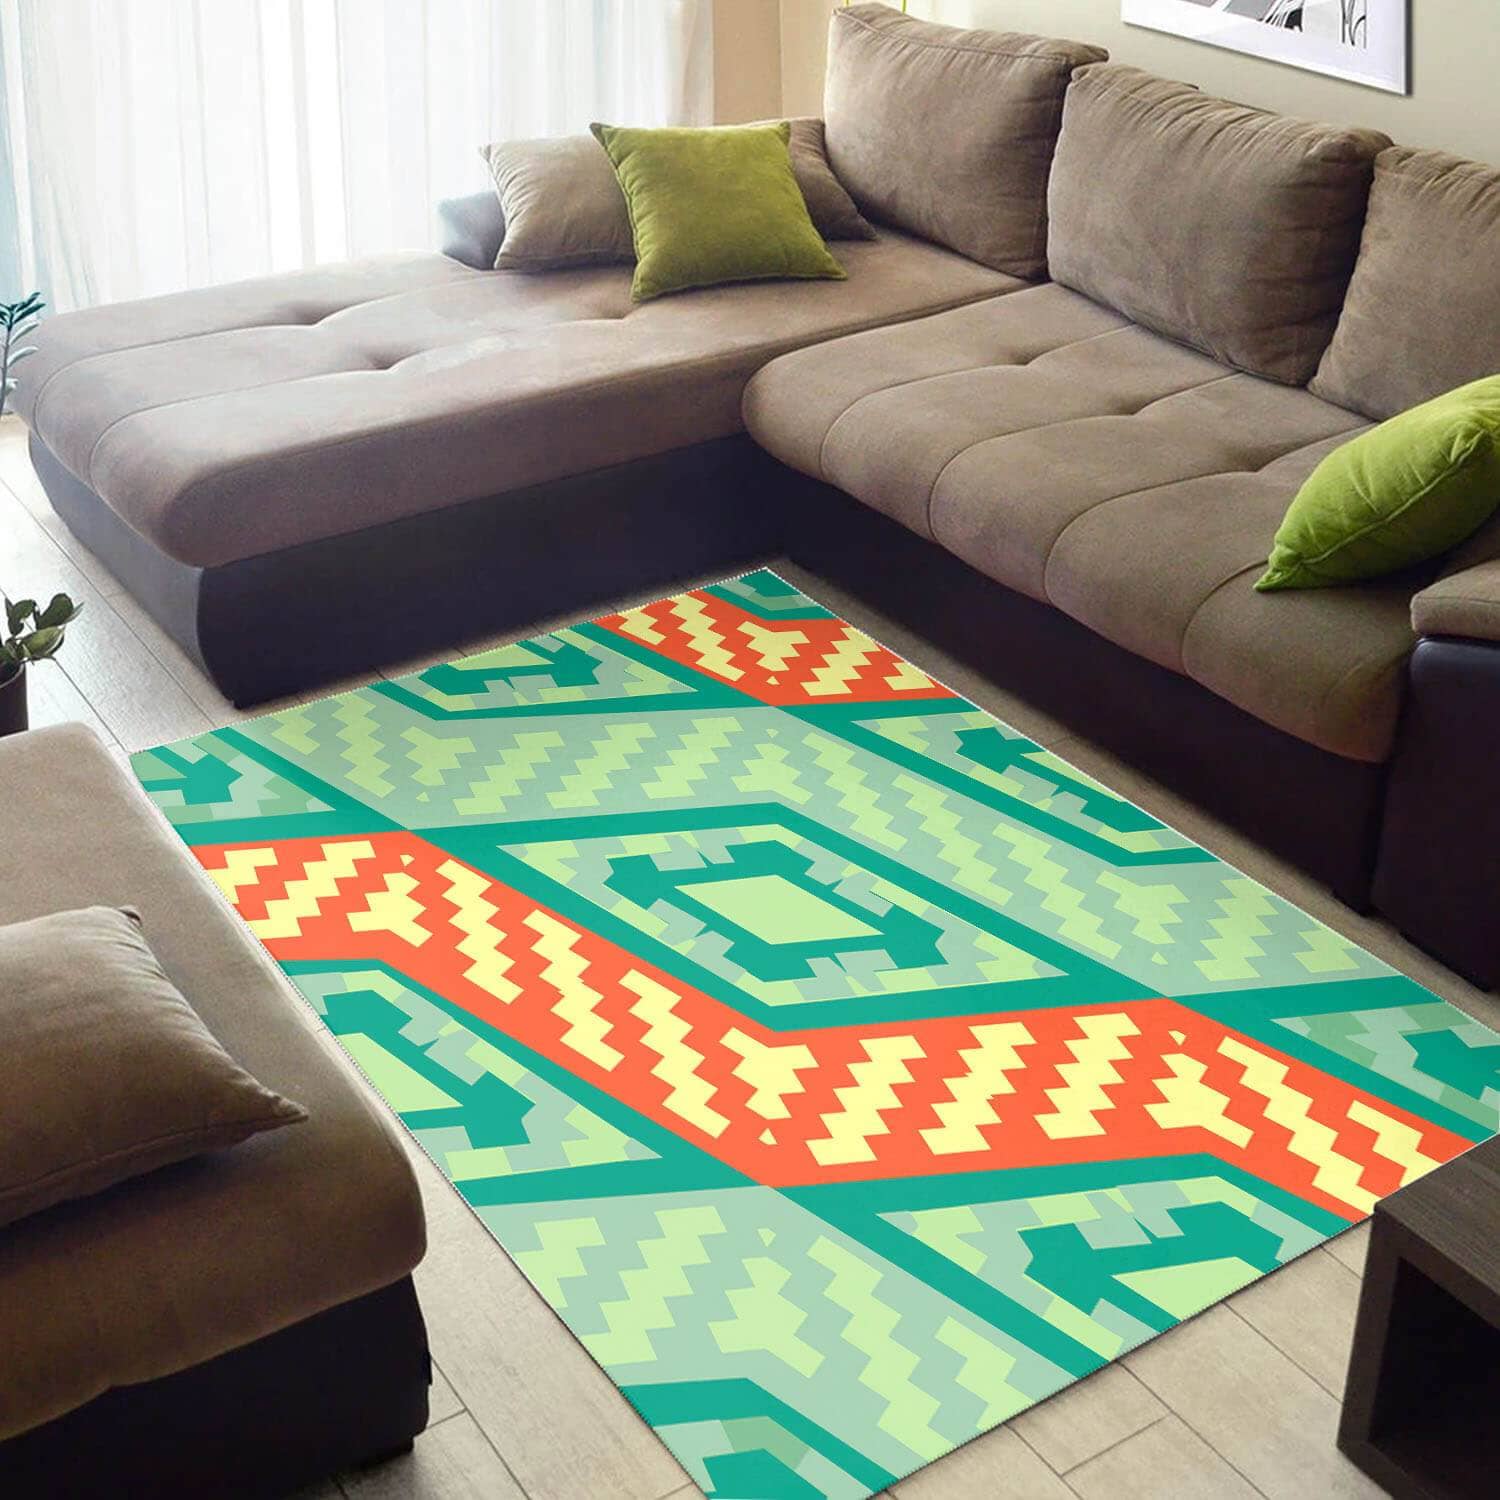 Inspired African Perfect Afro American Afrocentric Pattern Art Style Floor House Rug